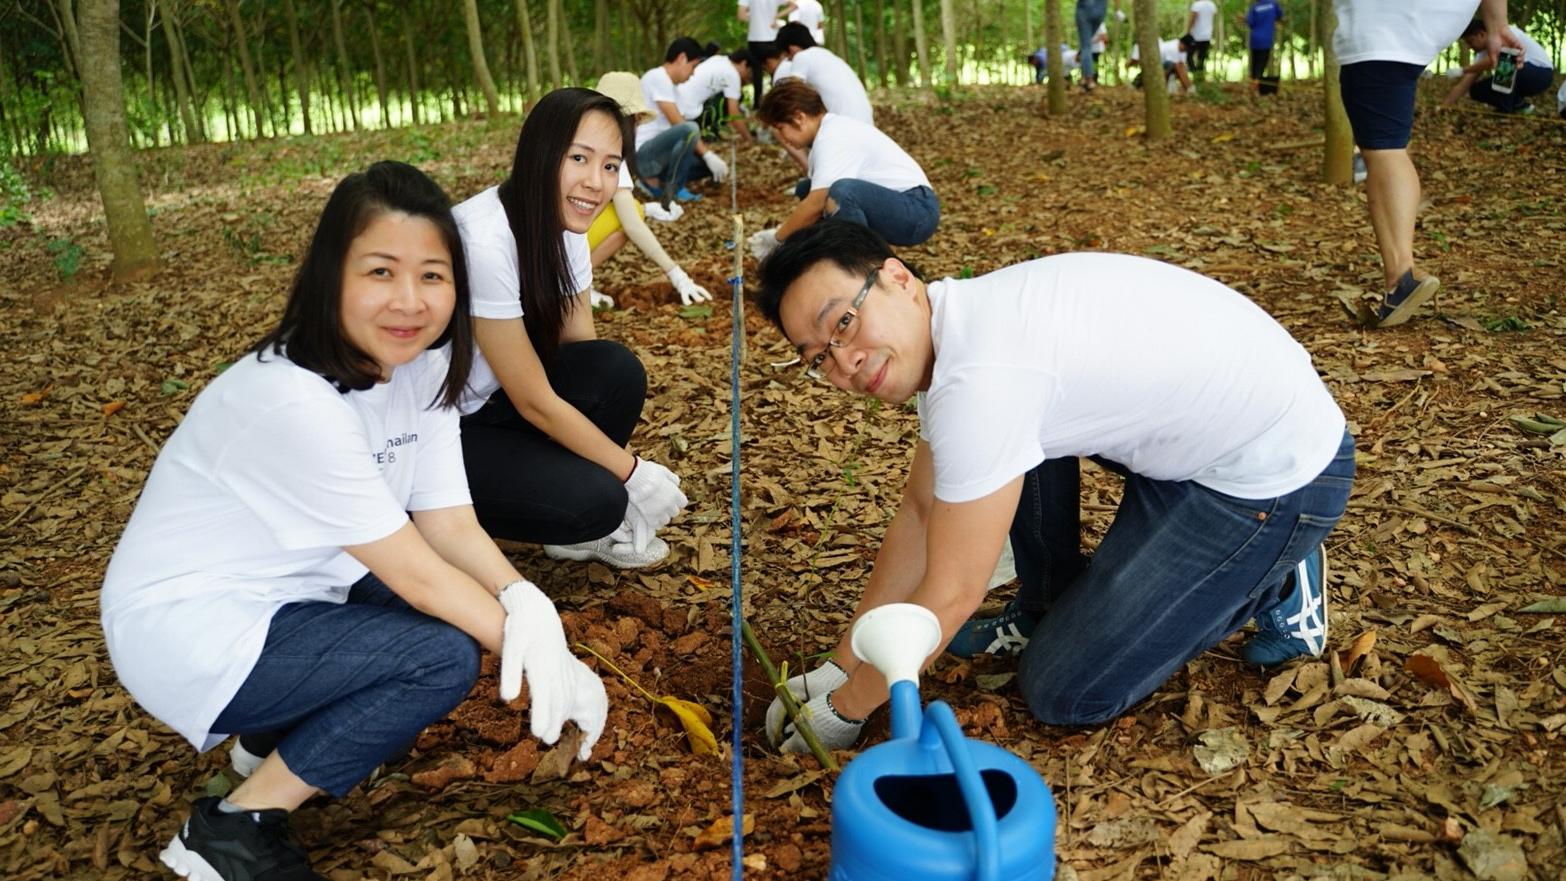 ZEISS colleagues sitting in a raw planting trees in Thailand’s third largest national park, Khao Yai